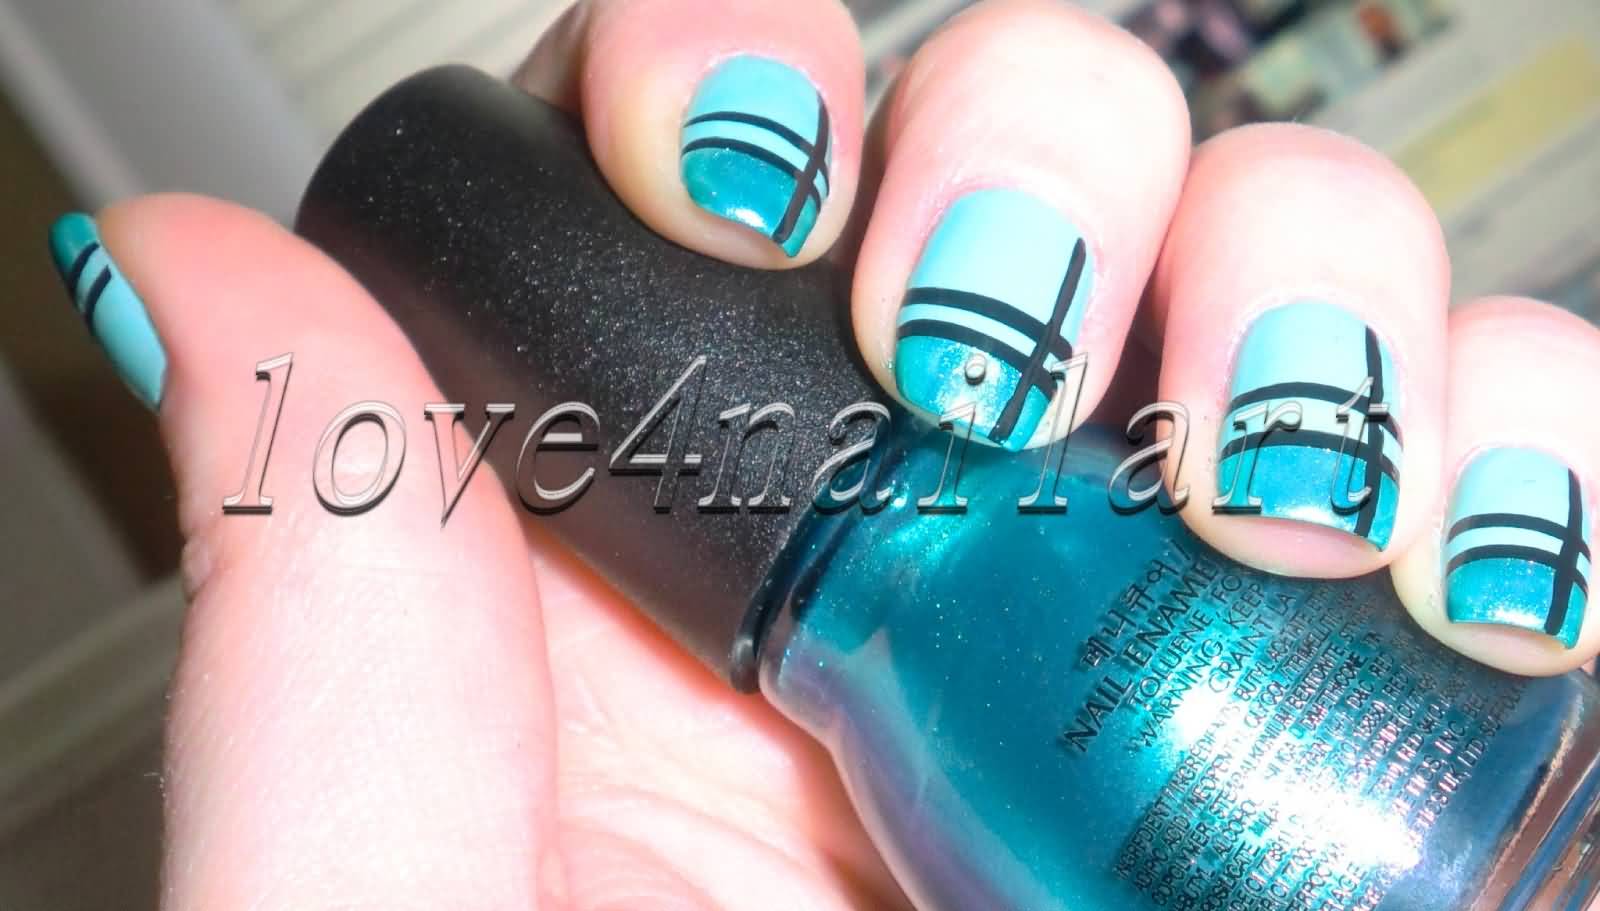 Blue Ombre Nails With Stripes Design Nail Art